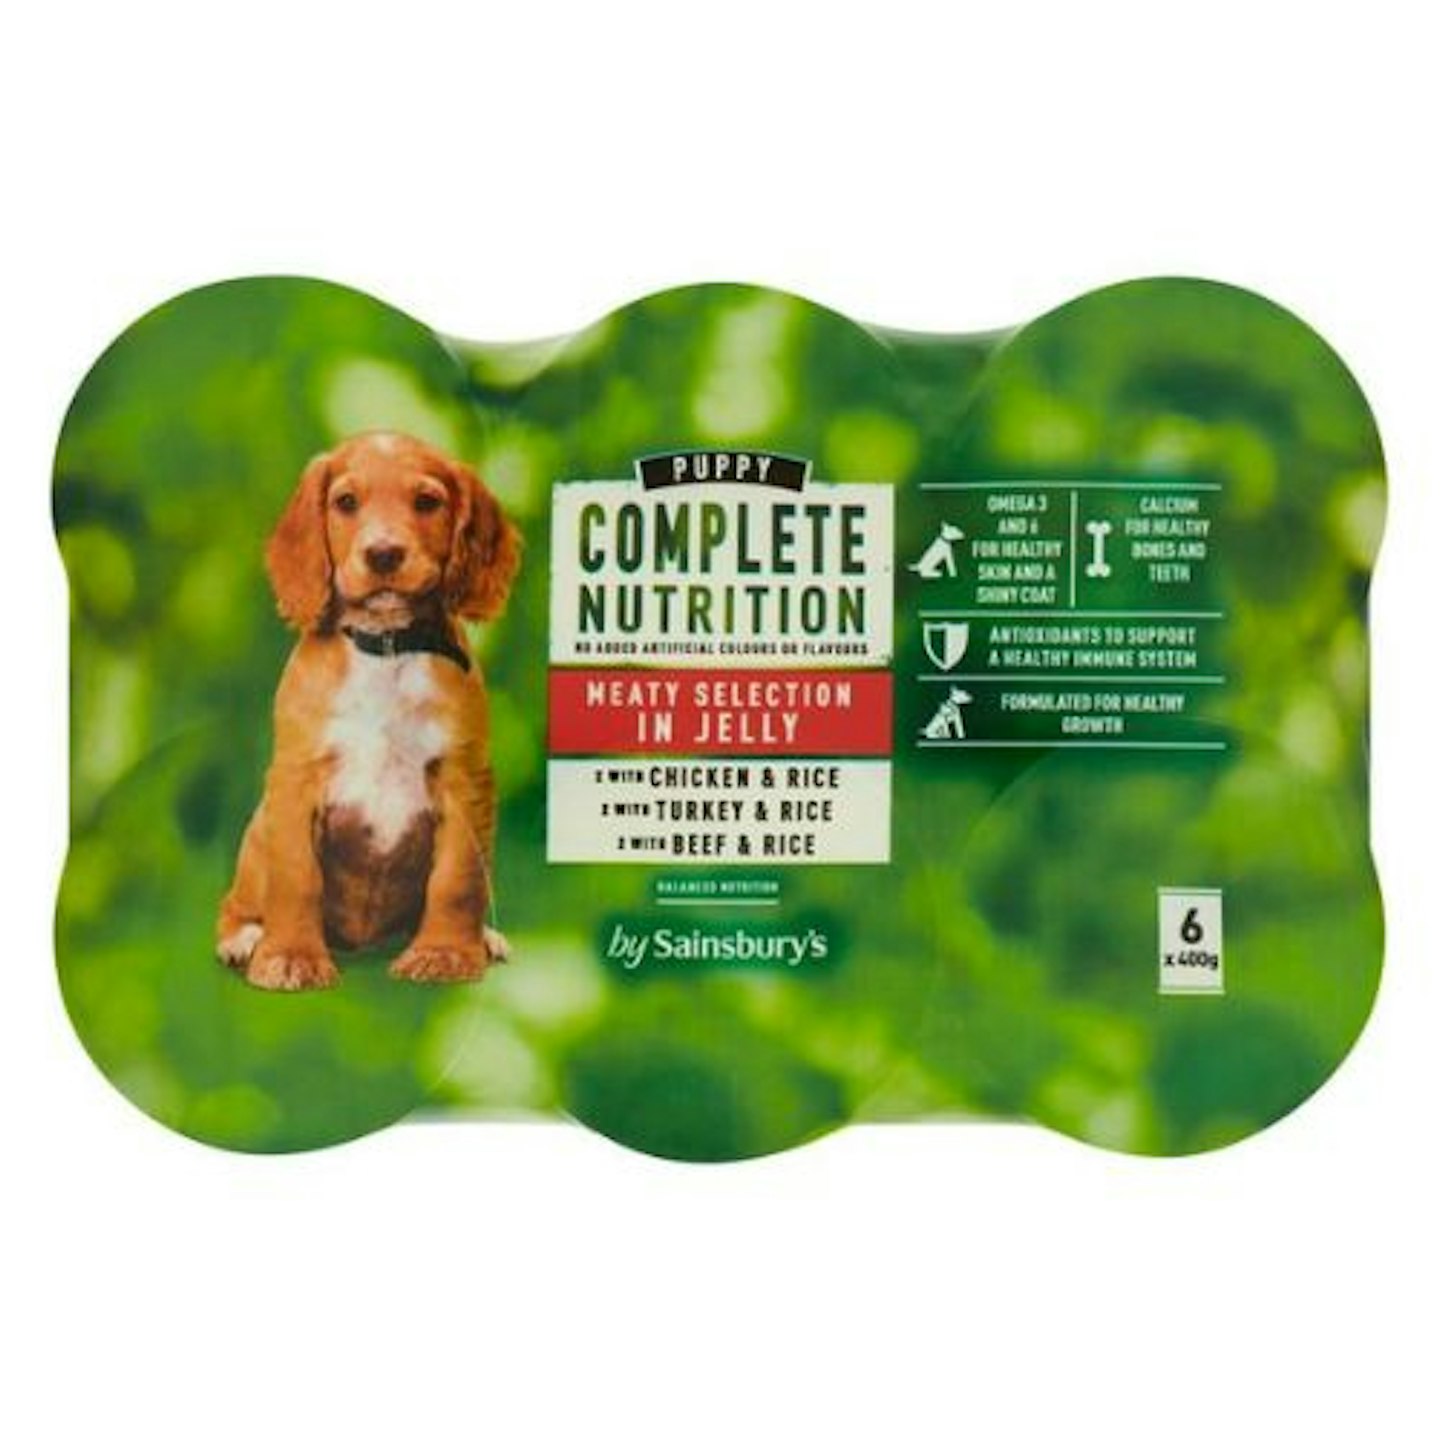 Sainsbury's Complete Nutrition Puppy Food Meat Selection in Jelly 6 x 400g